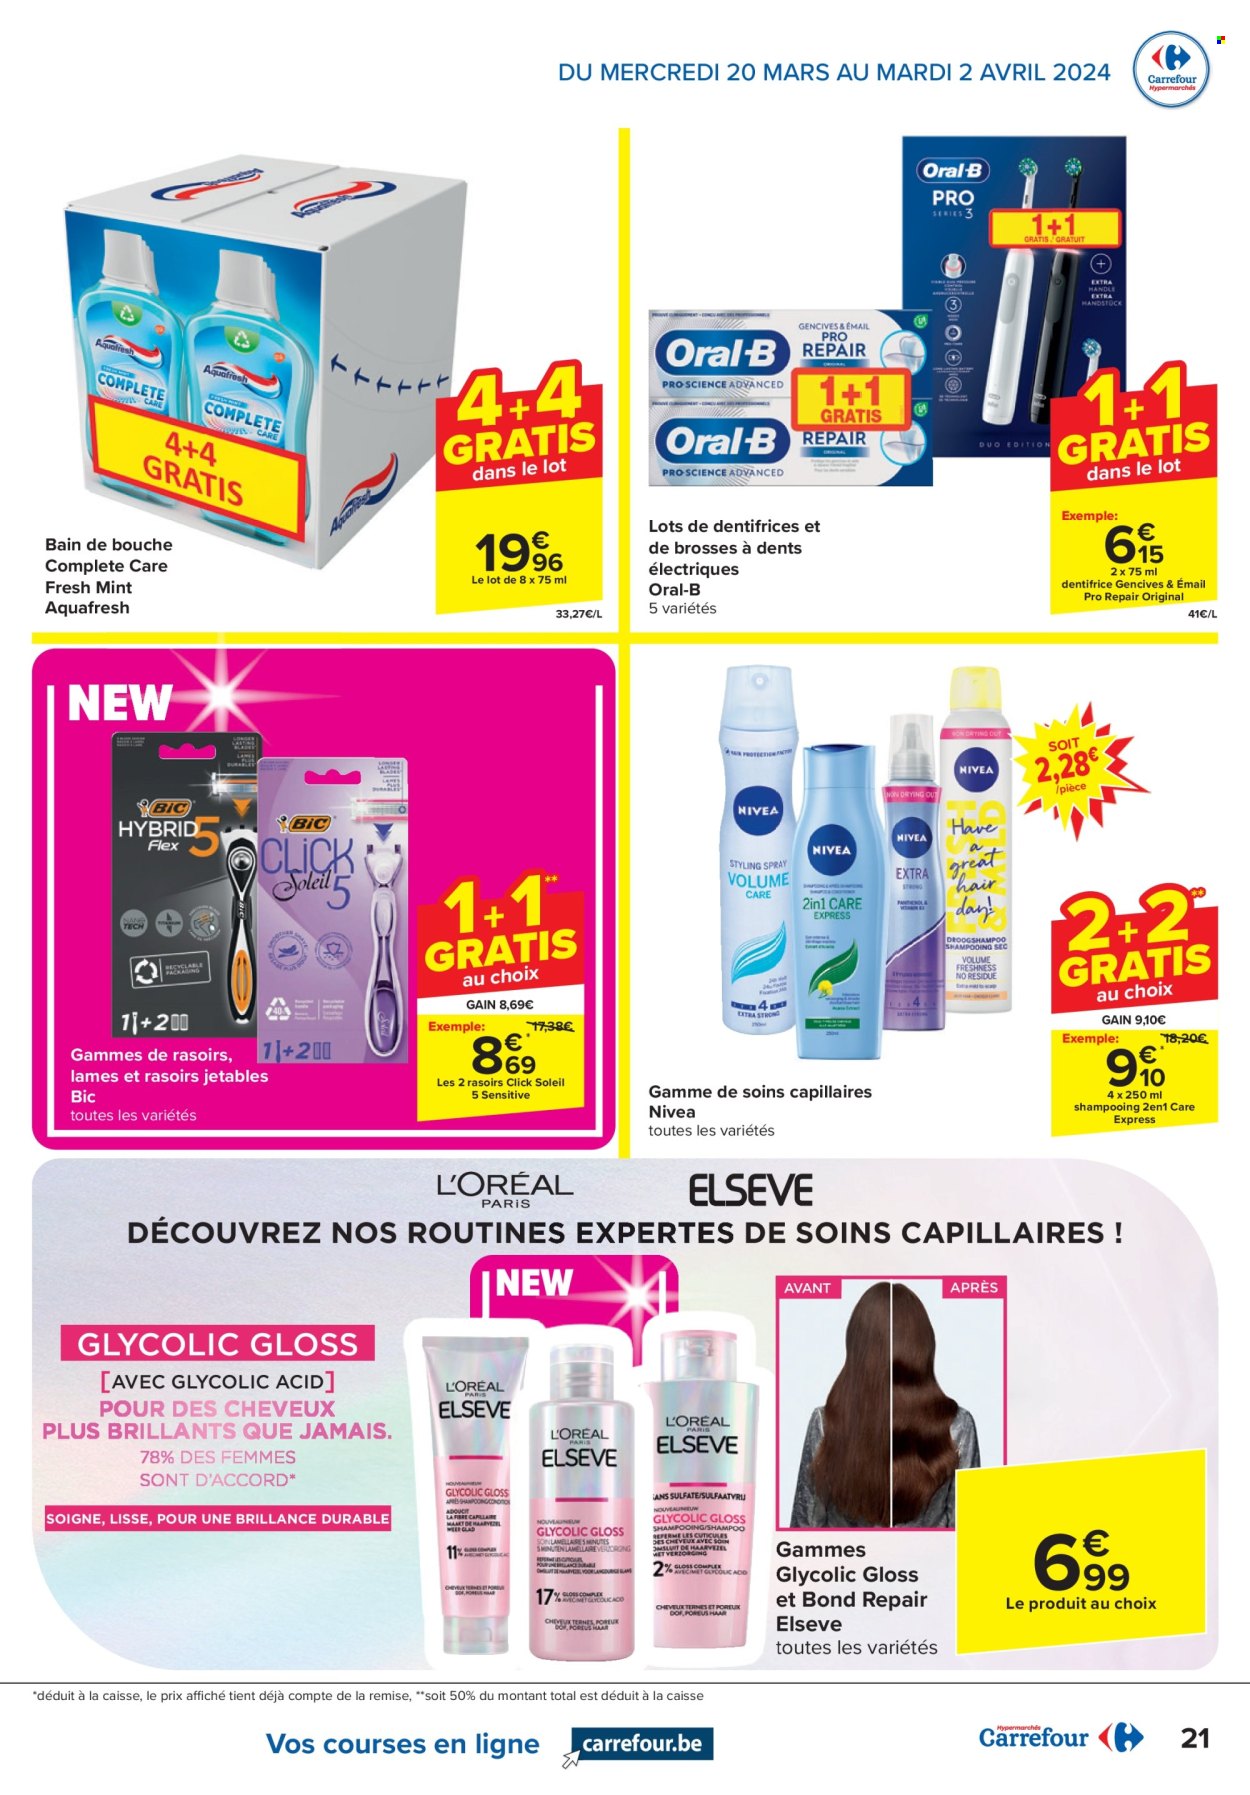 Catalogue Carrefour hypermarkt - 20.3.2024 - 2.4.2024. Page 21.